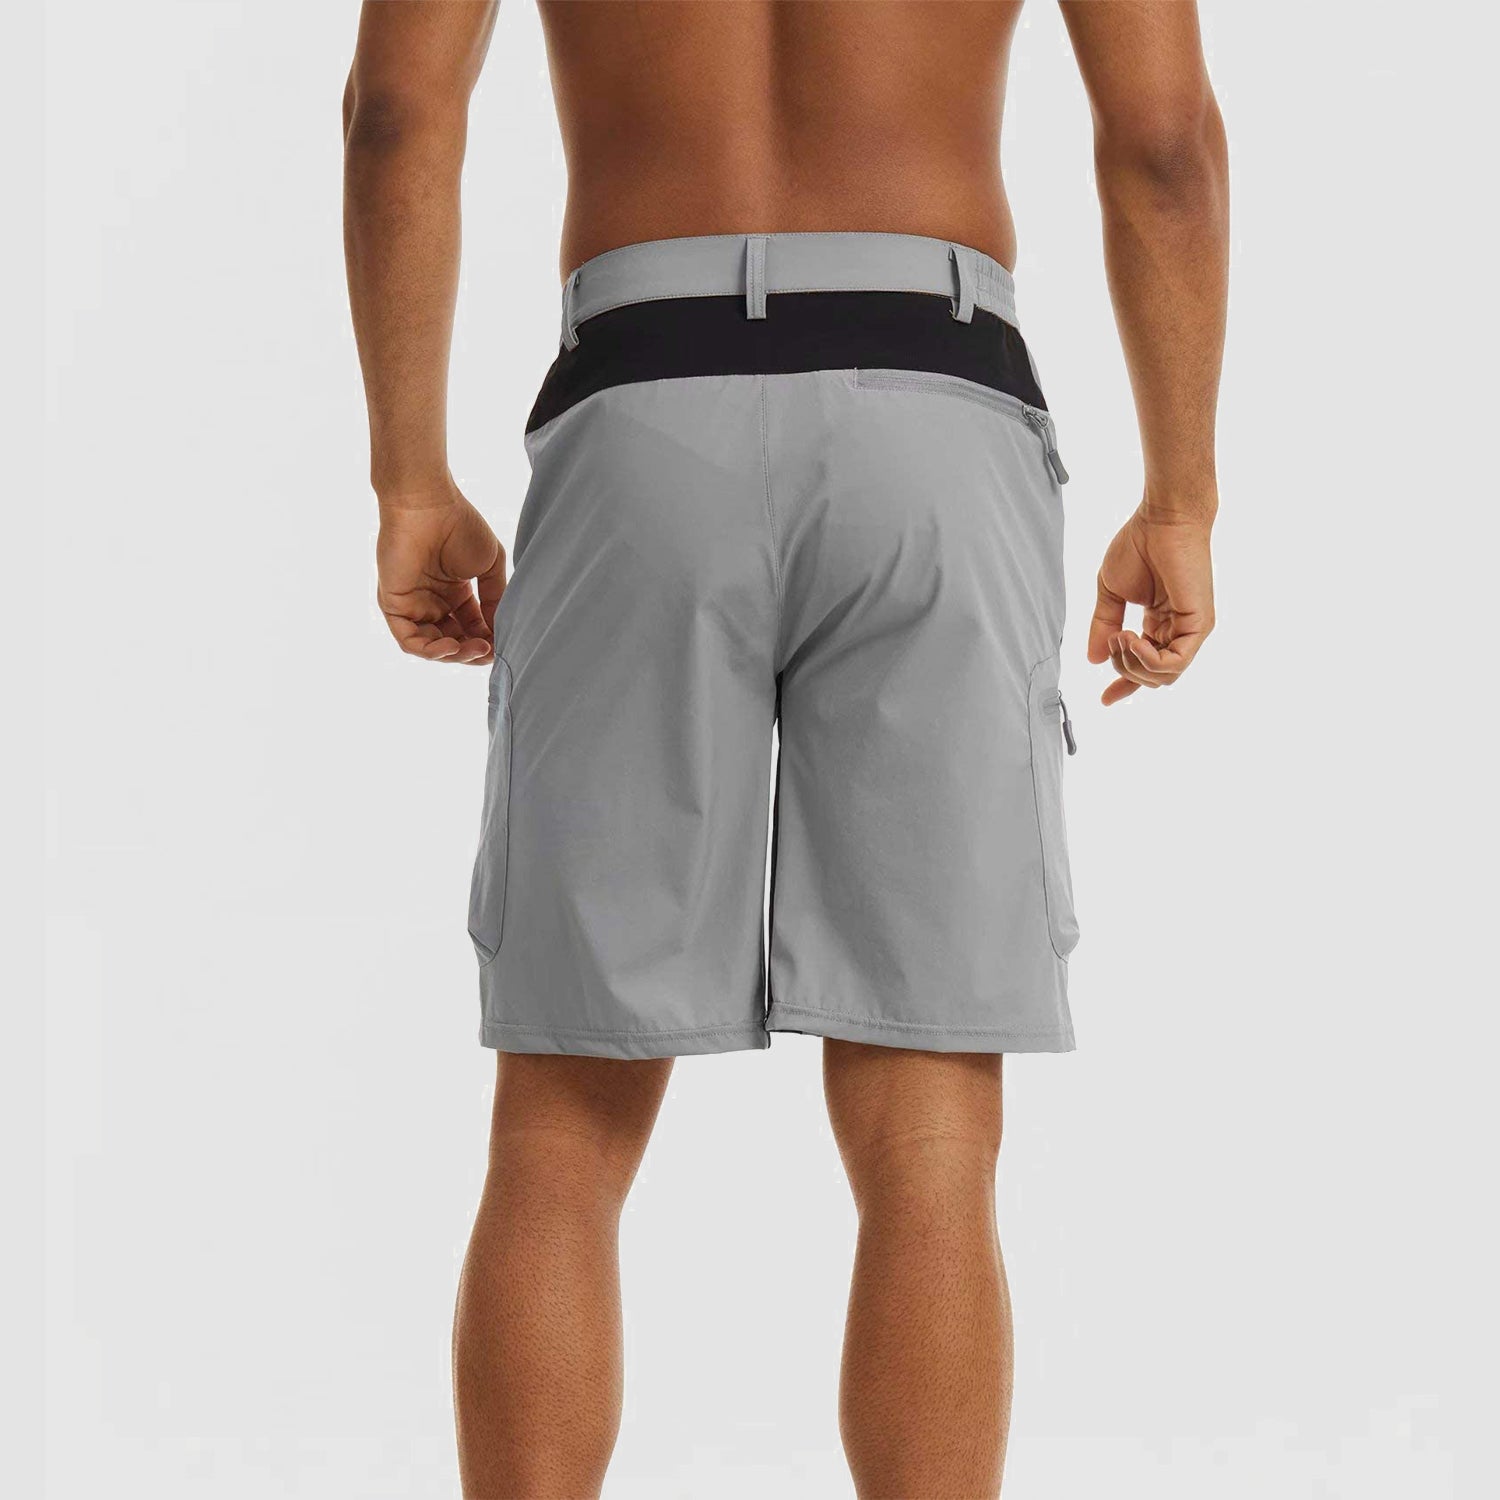 Buy 4 Get the 4th Free] ]Men's Quick Dry Cargo Shorts – MAGCOMSEN